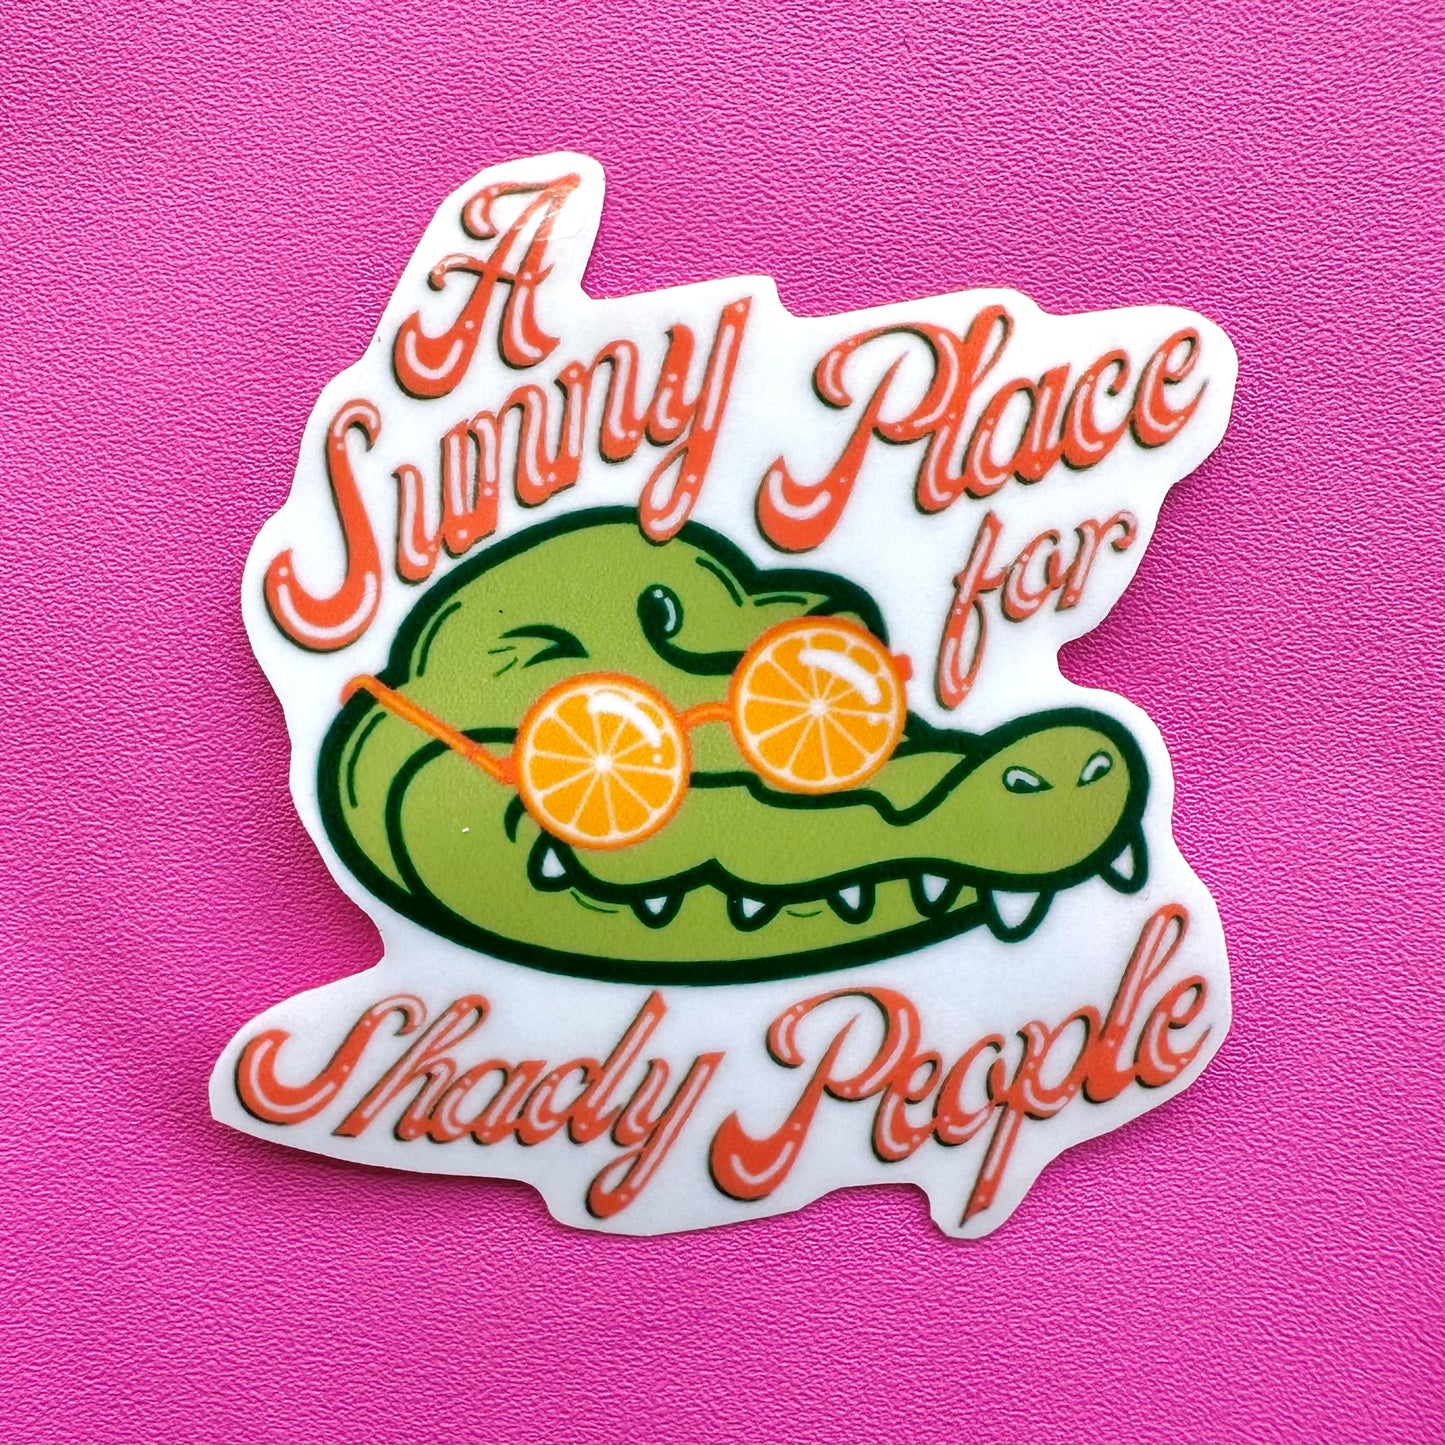 A sunny place for shady people Stickers